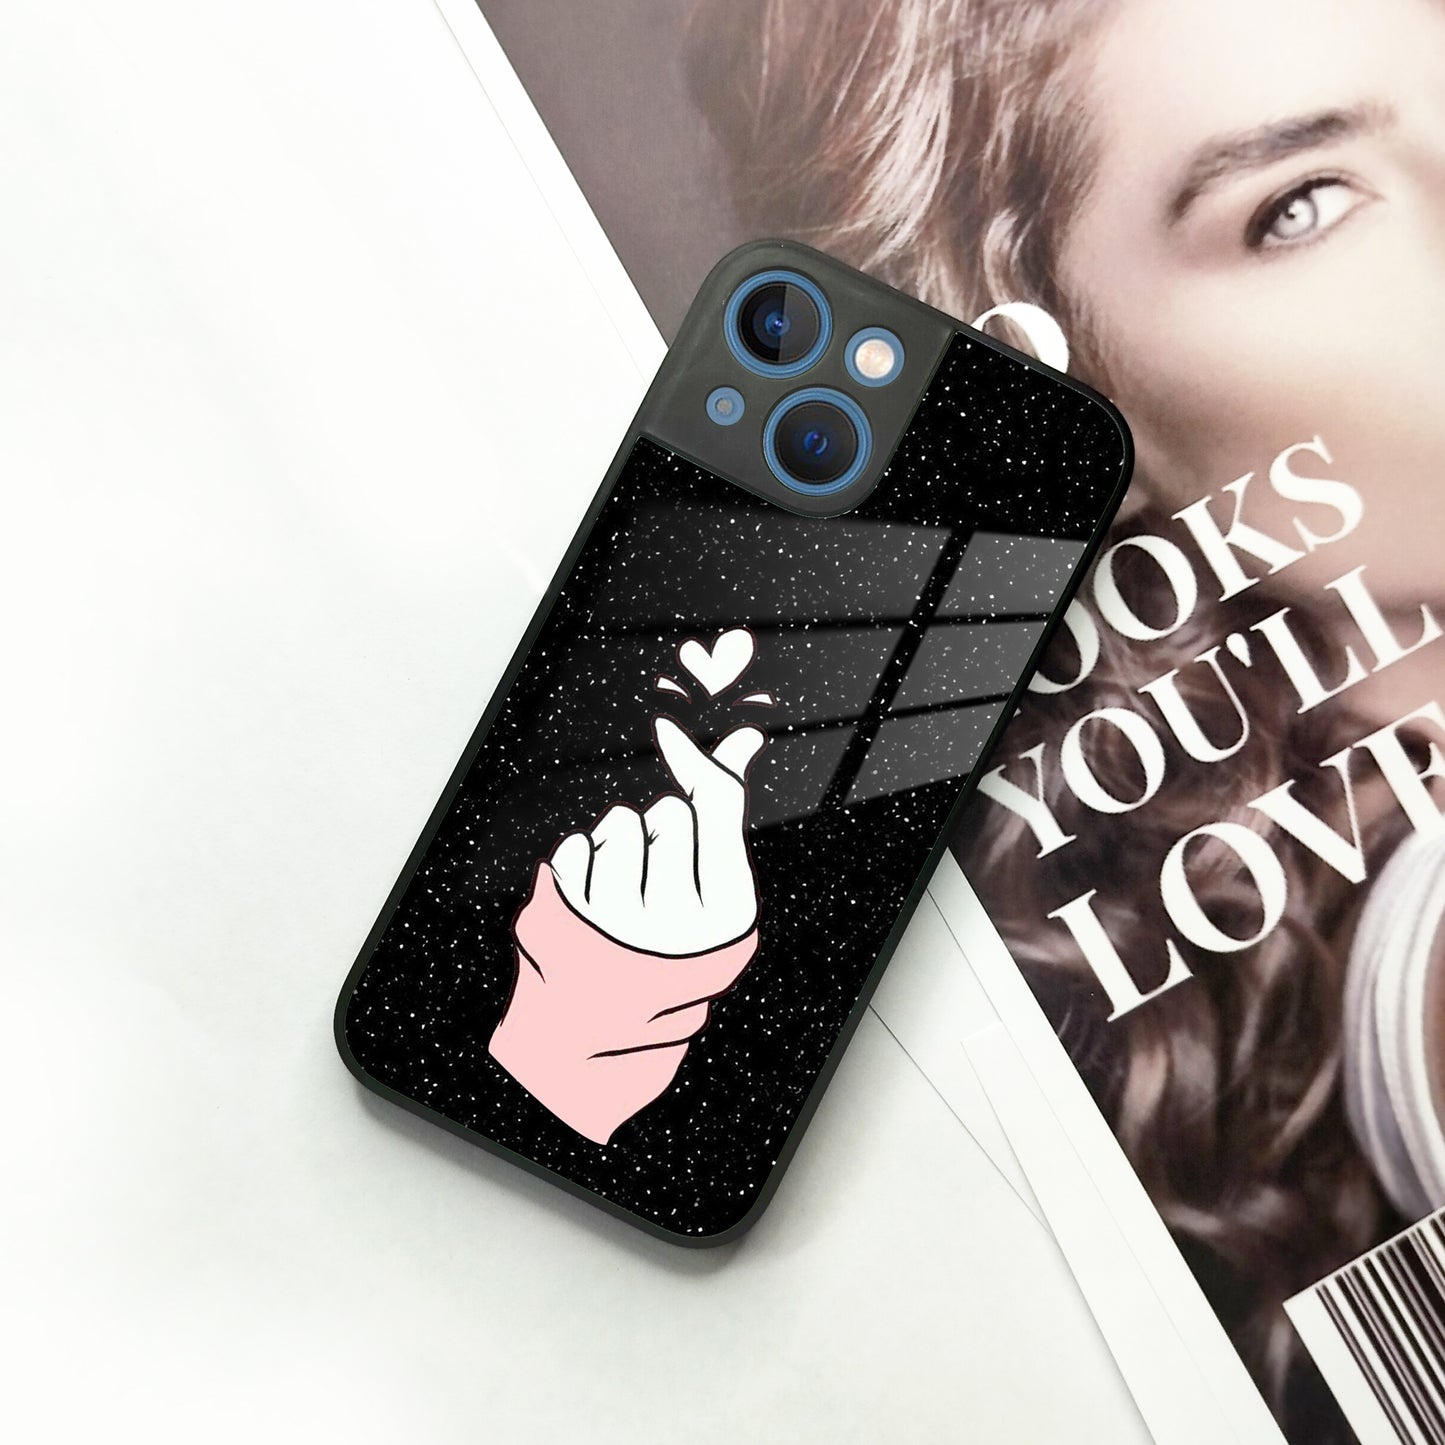 Kpop Love Glass Phone Case And Cover For iPhone